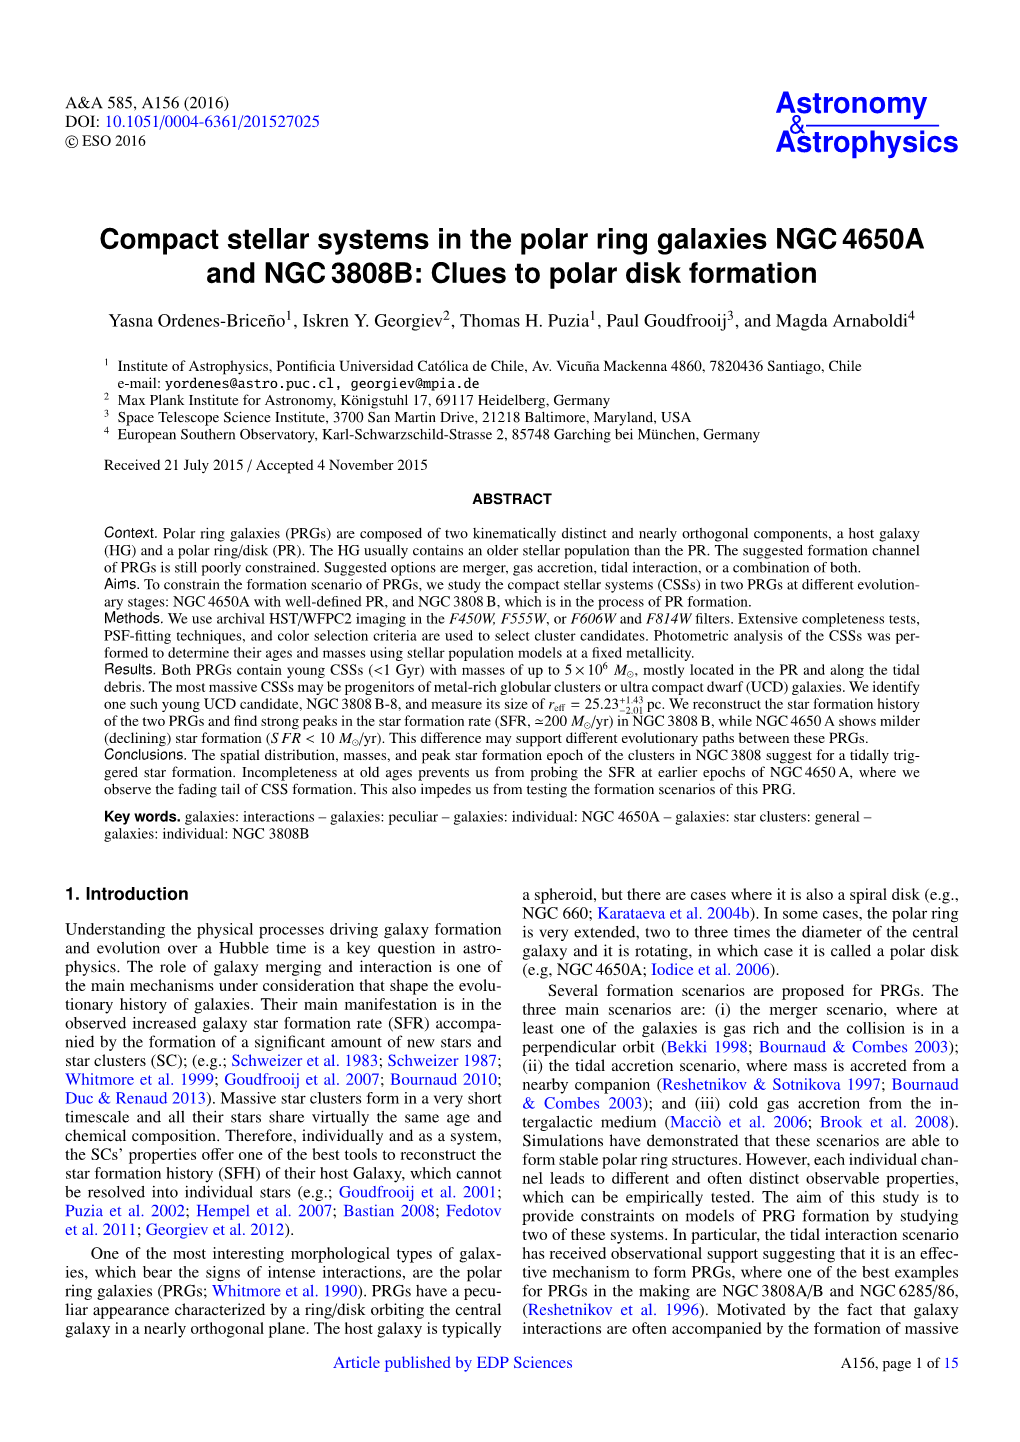 Compact Stellar Systems in the Polar Ring Galaxies NGC 4650A and NGC 3808B: Clues to Polar Disk Formation